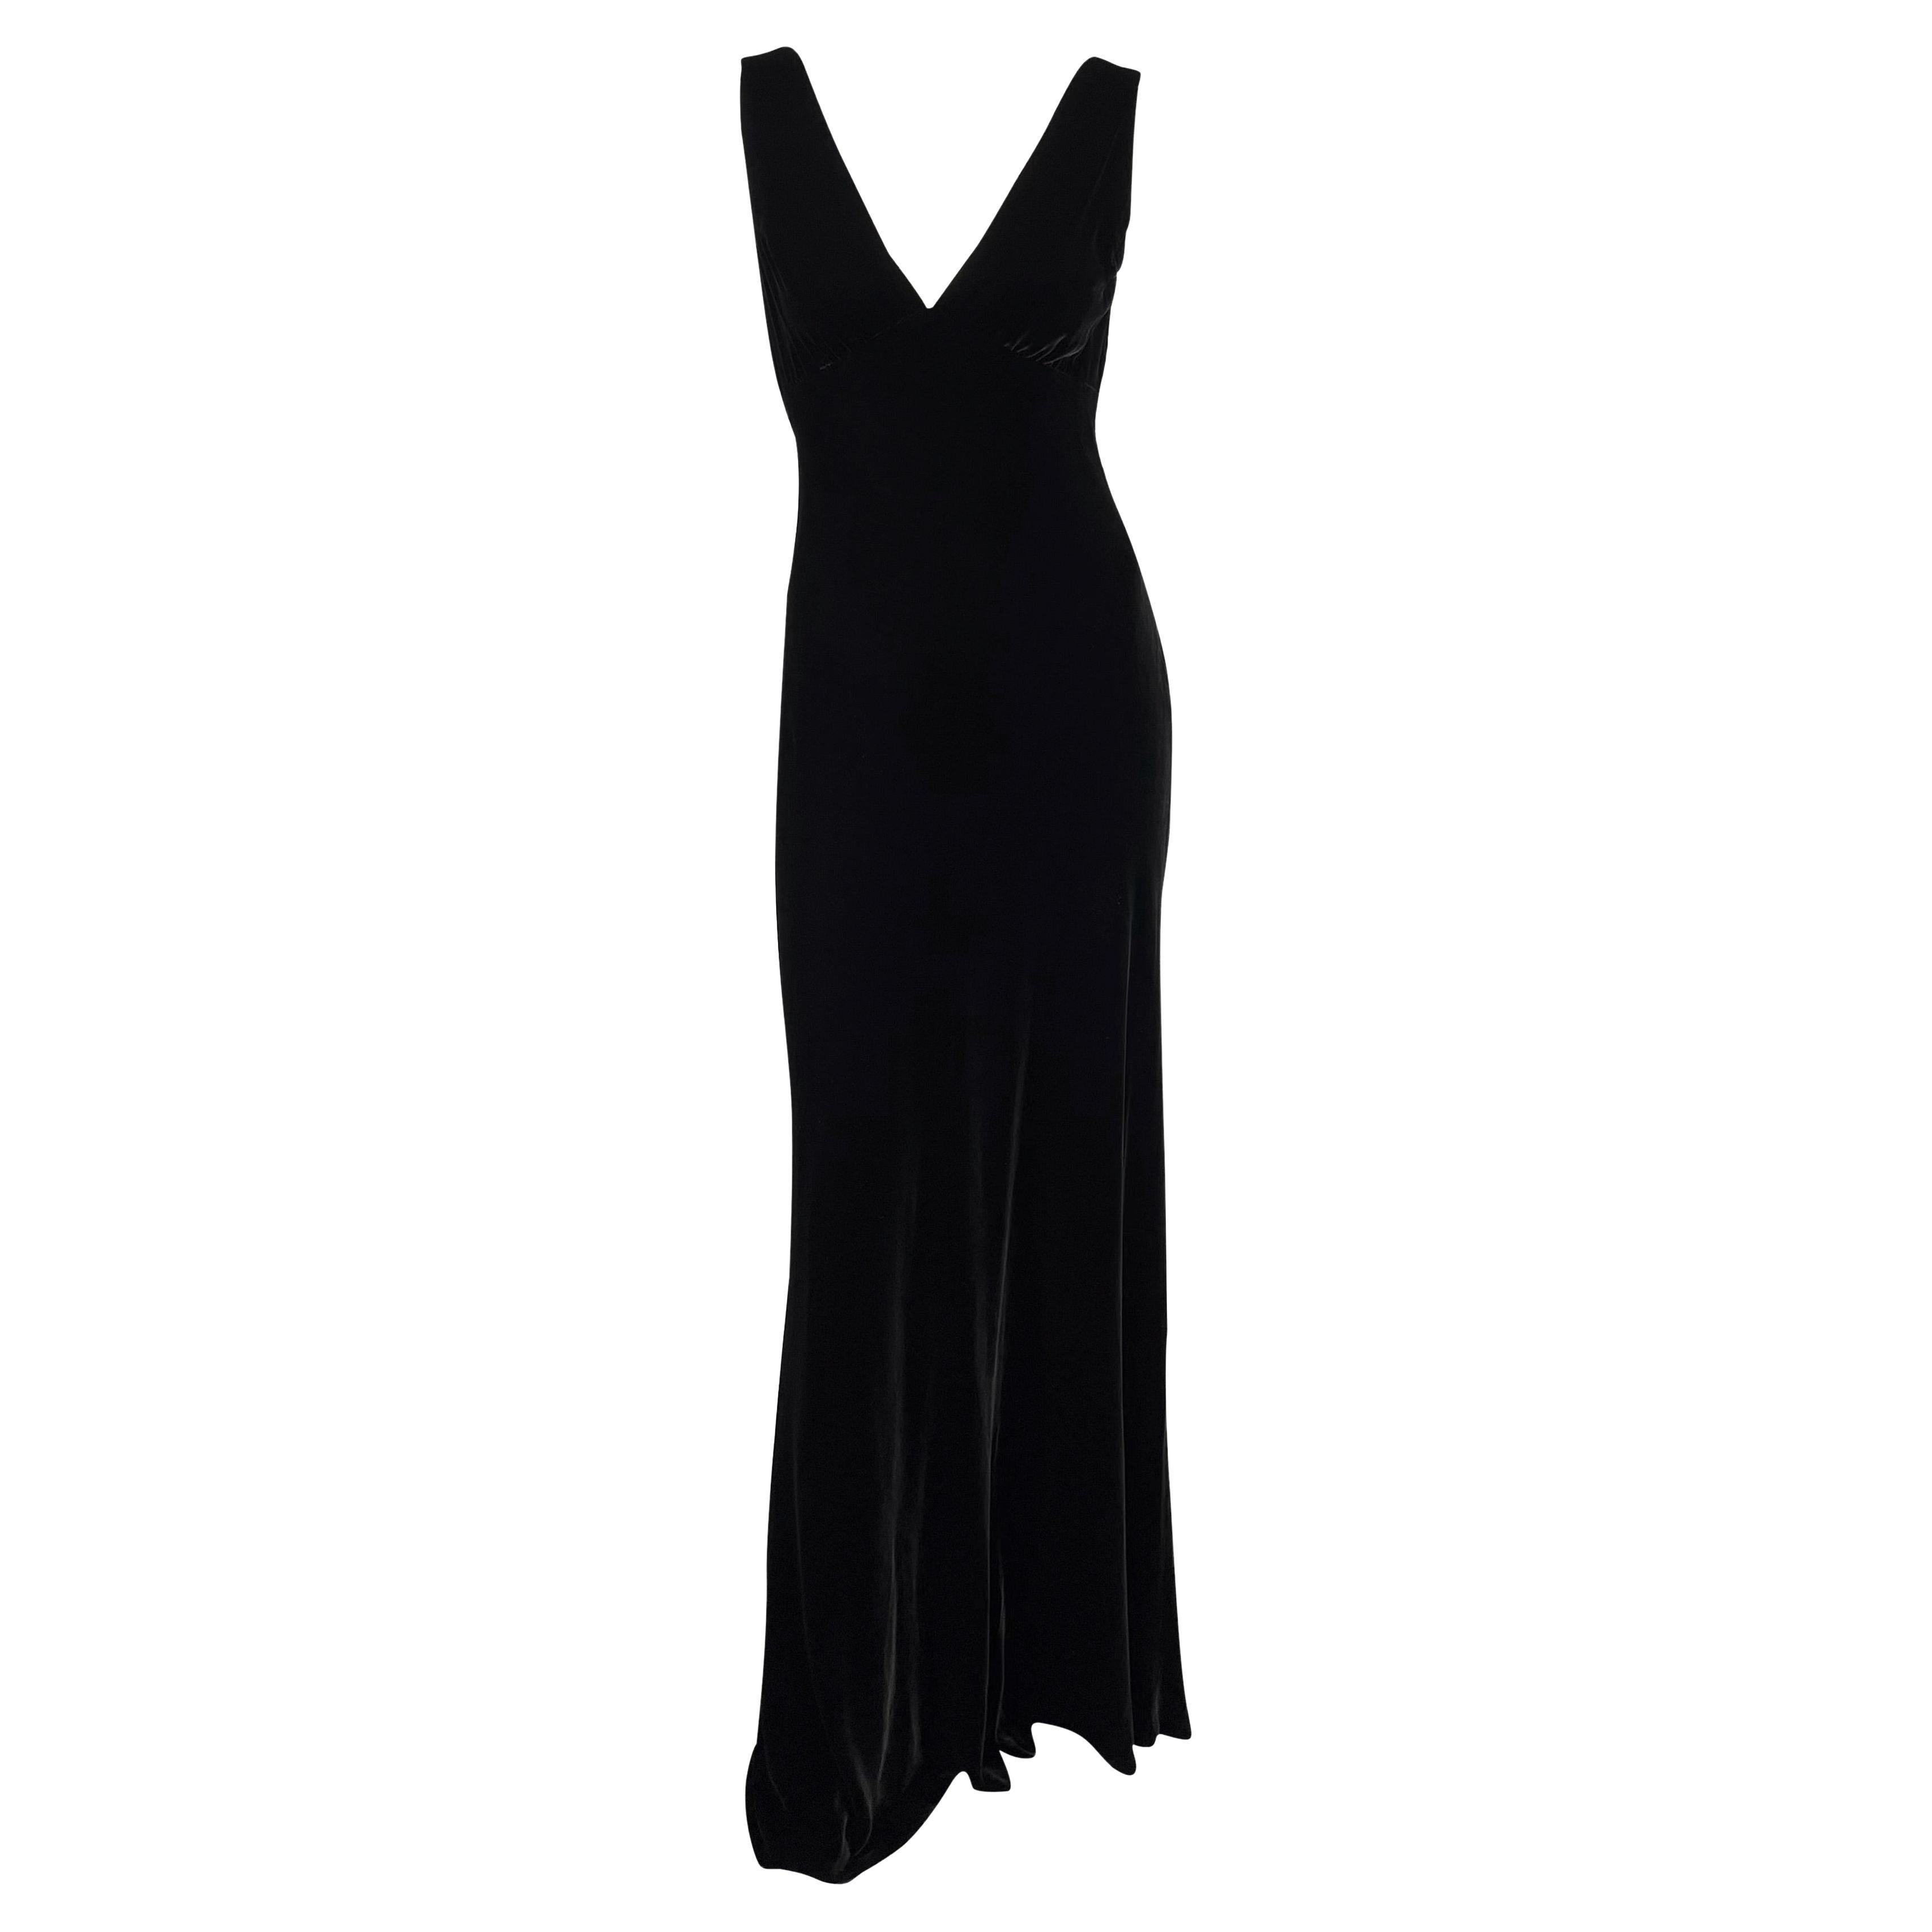 F/W 2002 Ralph Lauren Runway Plunging V Neckline Black Velvet Sleeveless Gown In Excellent Condition For Sale In West Hollywood, CA